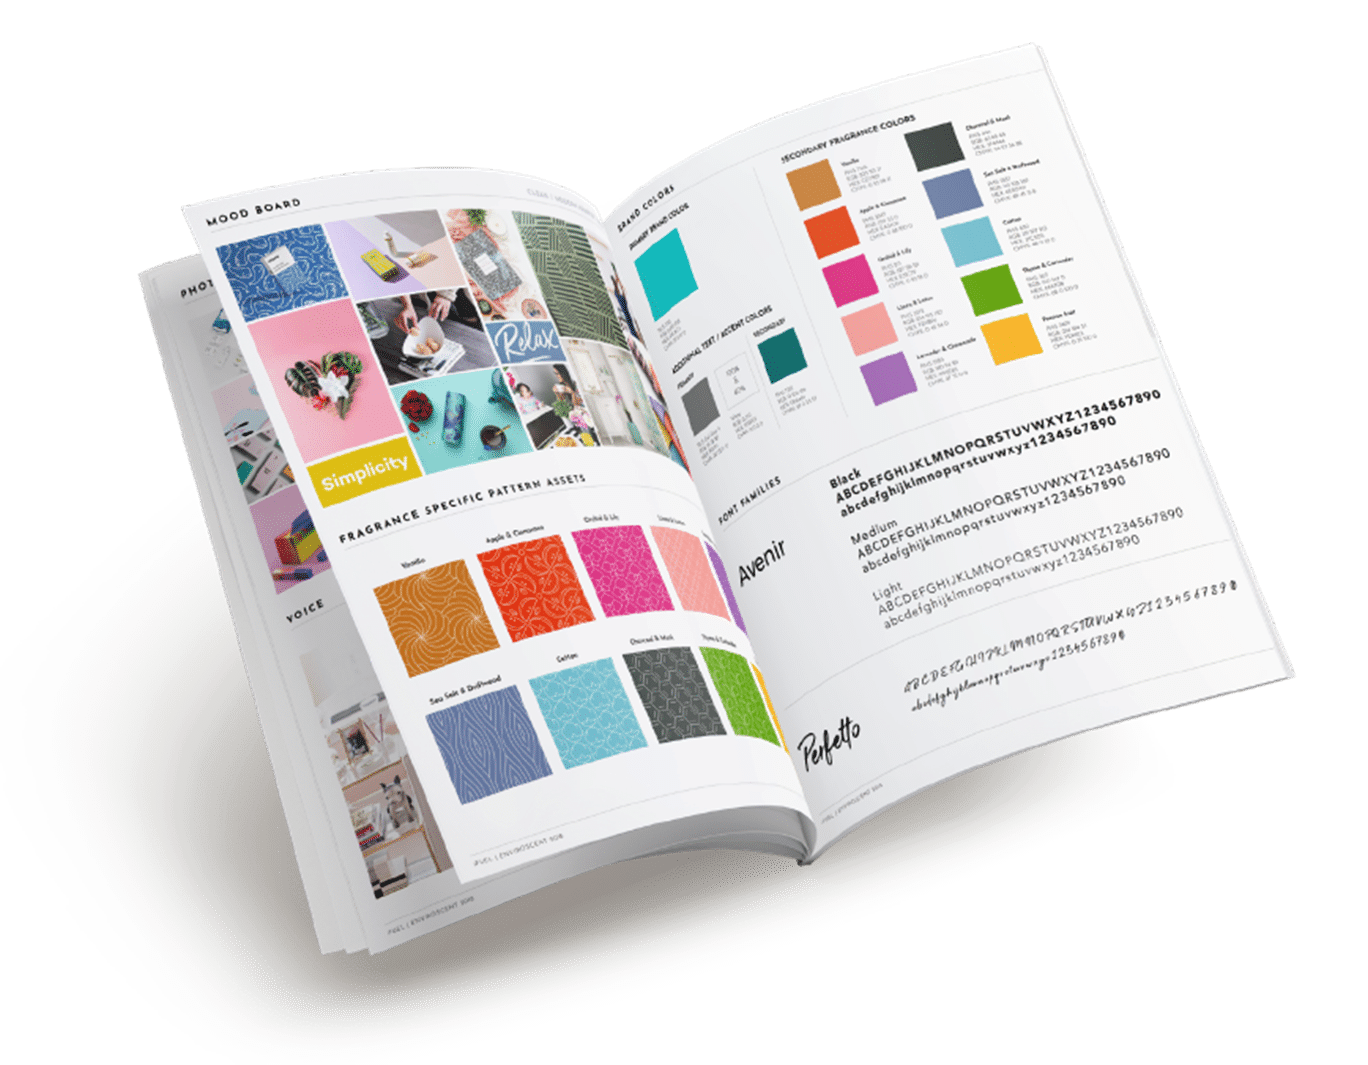 Booklet with brand guidelines and color palette.